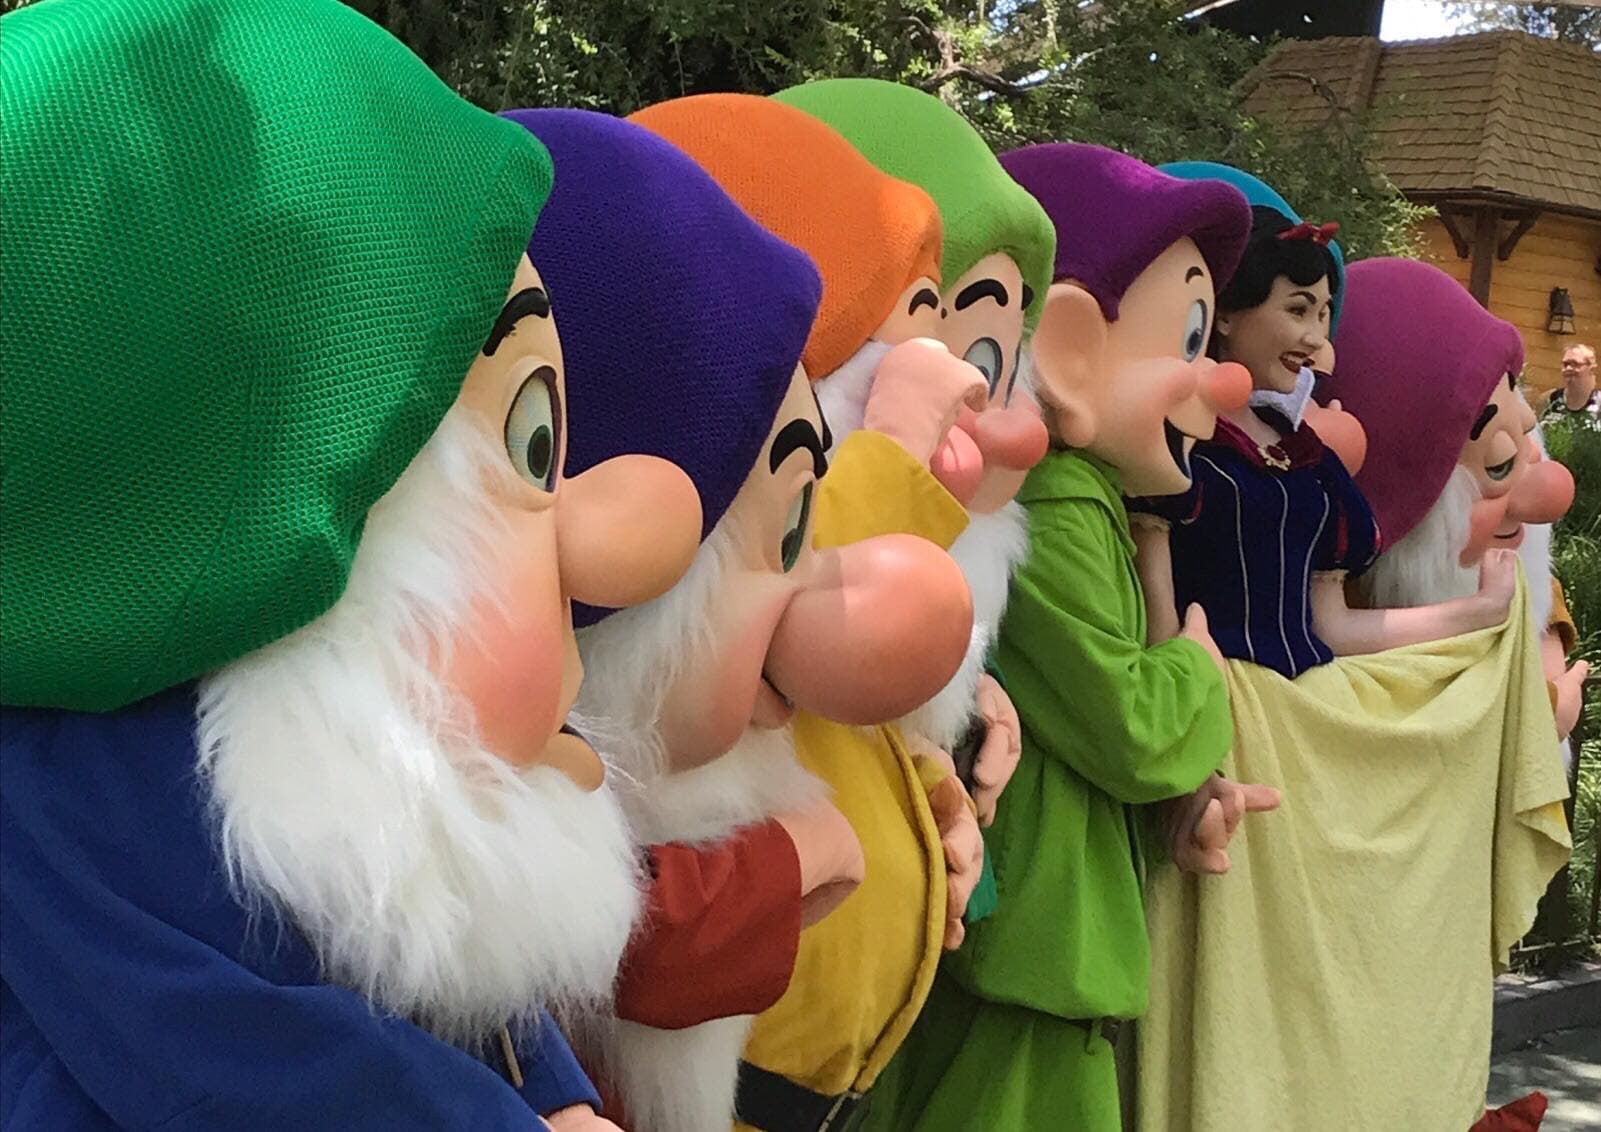 Snow White and The Seven Dwarfs Make Rare Appearance at Disneyland Resort